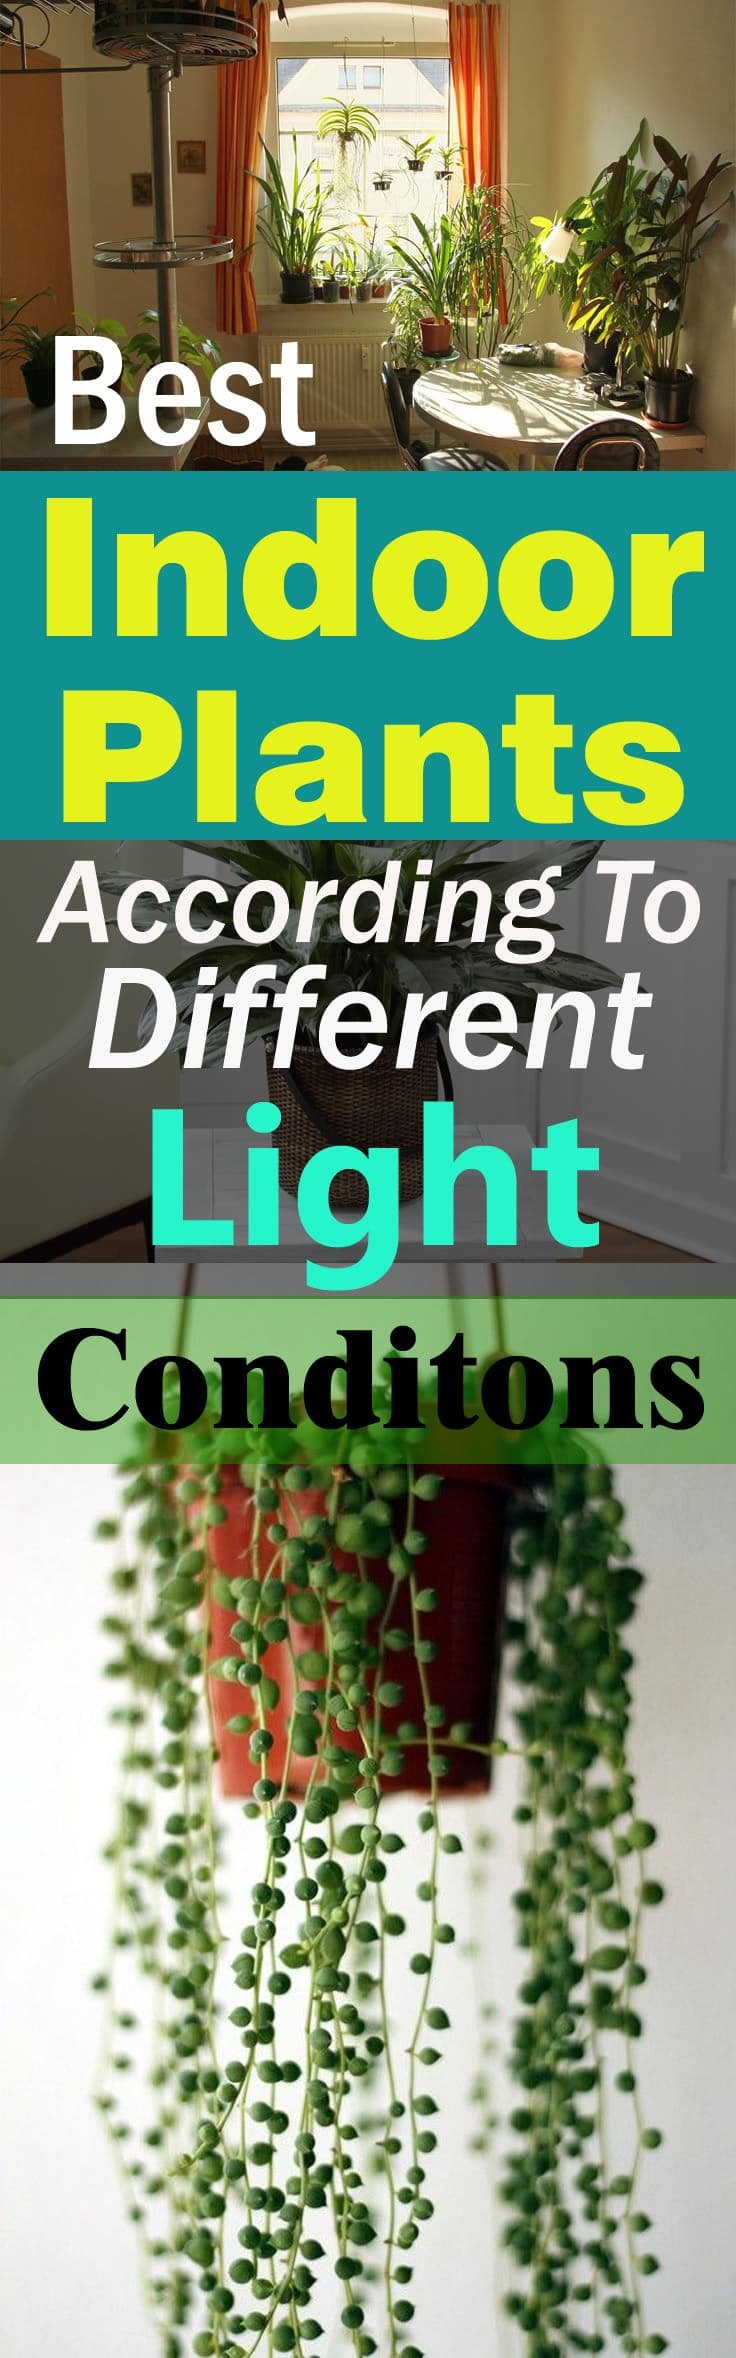 best-indoor-plants-according-to-different-light-conditions2-copy